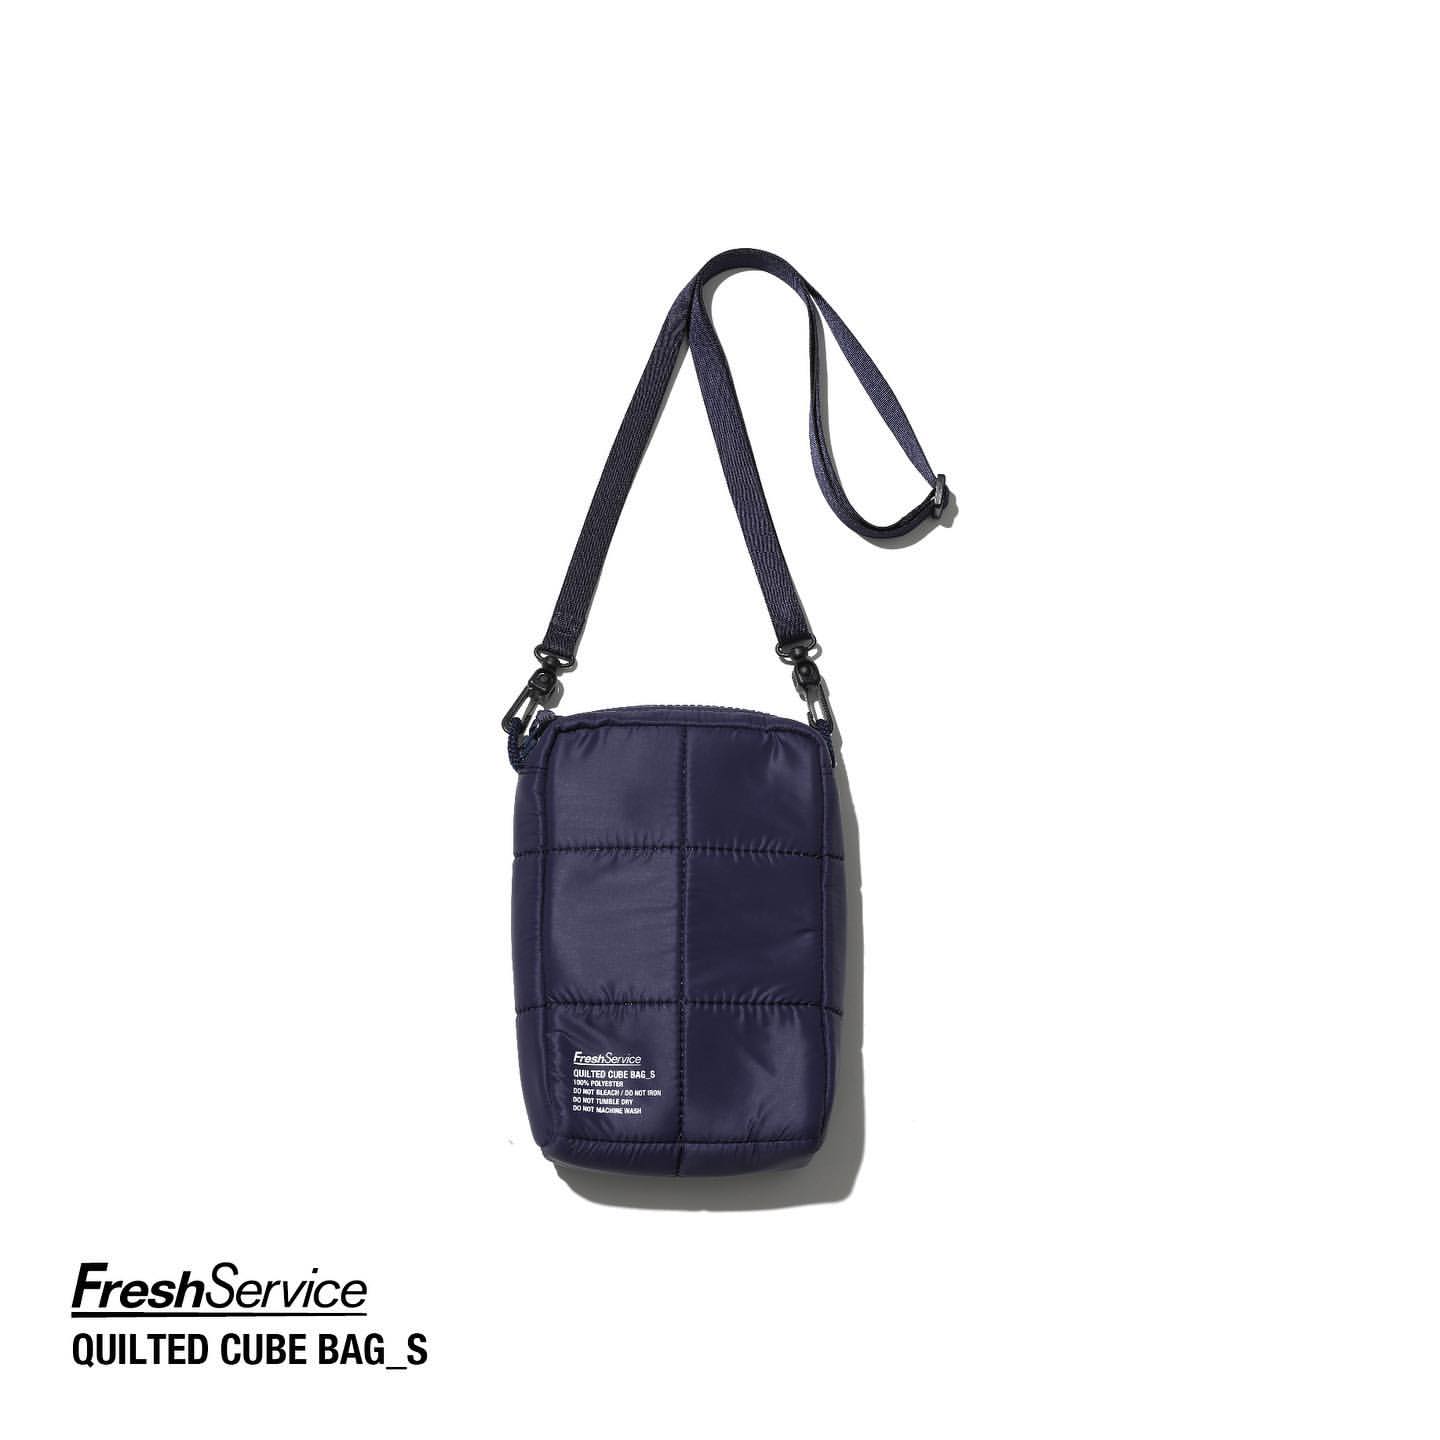 FreshServiceのQUILTED CUBE BAG_S